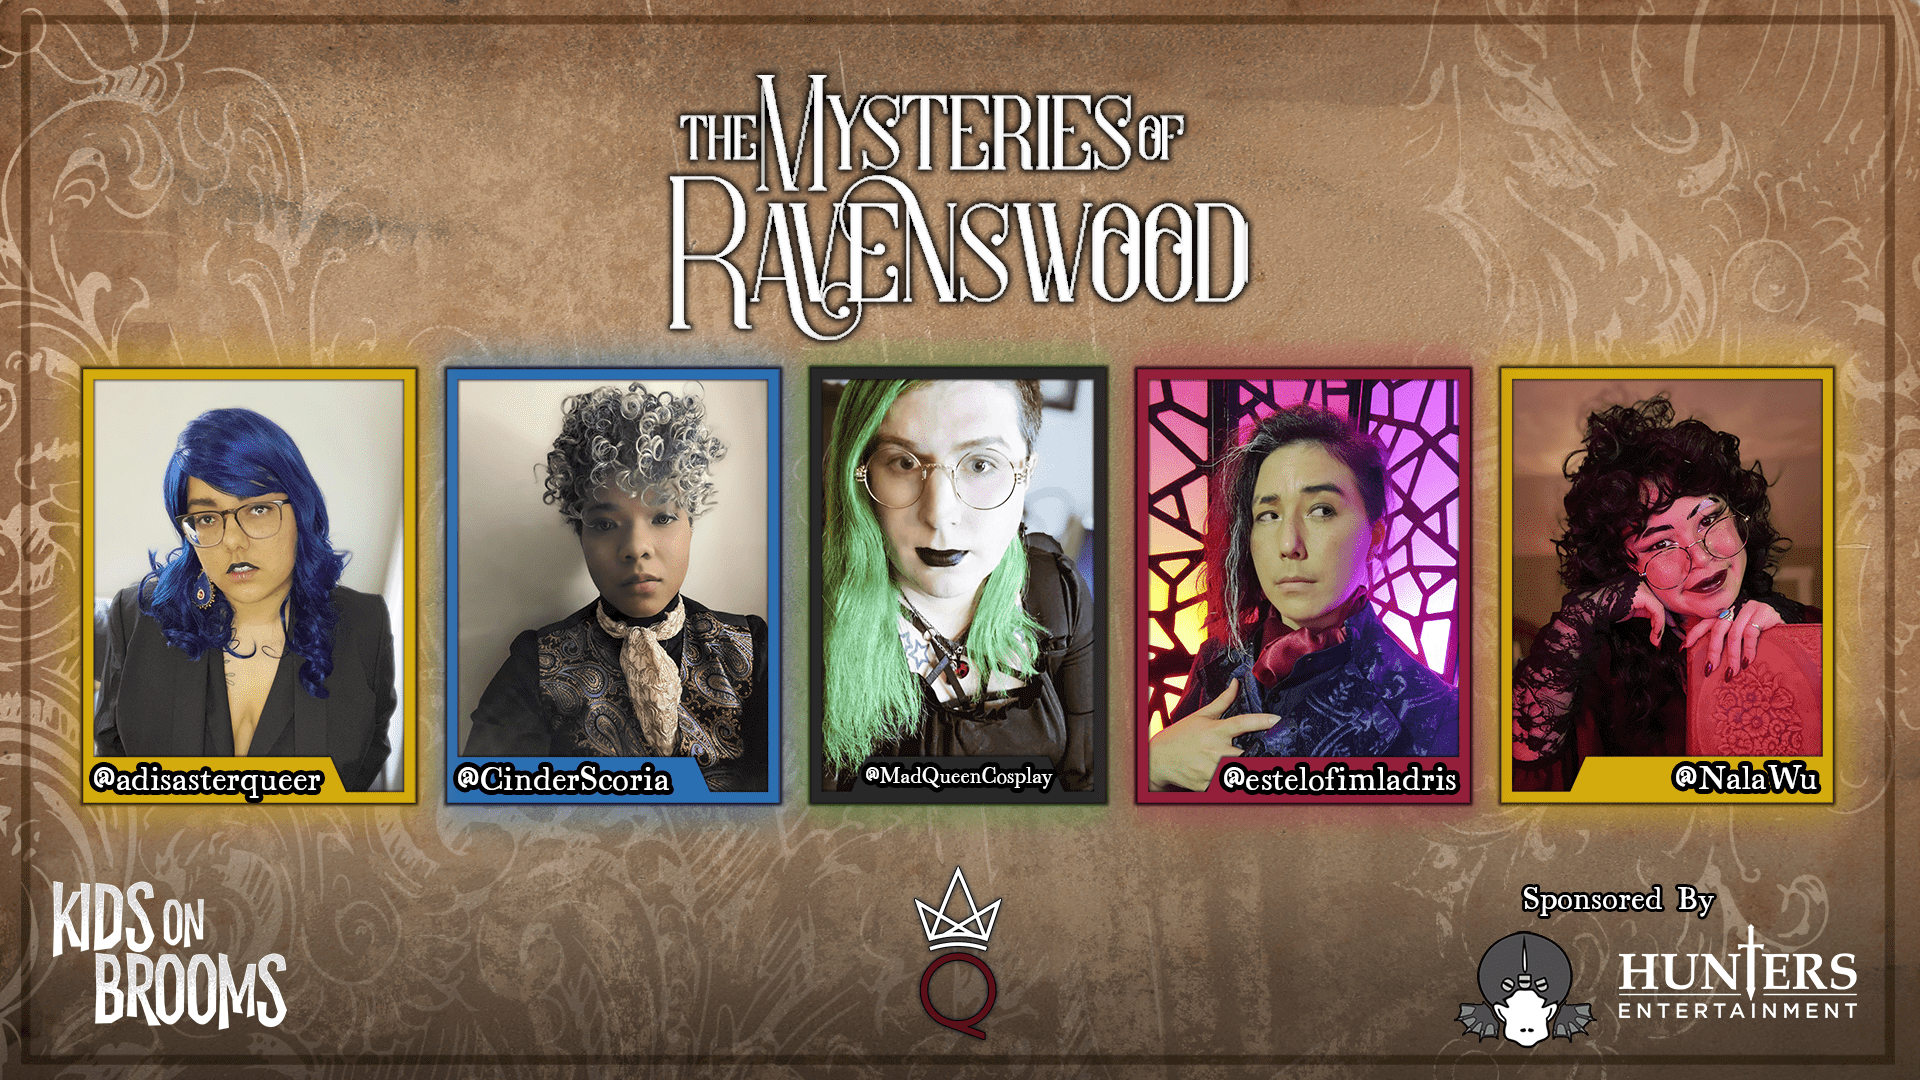 The Mysteries of Ravenswood cast

From left to right:
@adisasterqueer
@cinderScortia
@MadQueerCosplay
@estelofimladris
@NalaWu